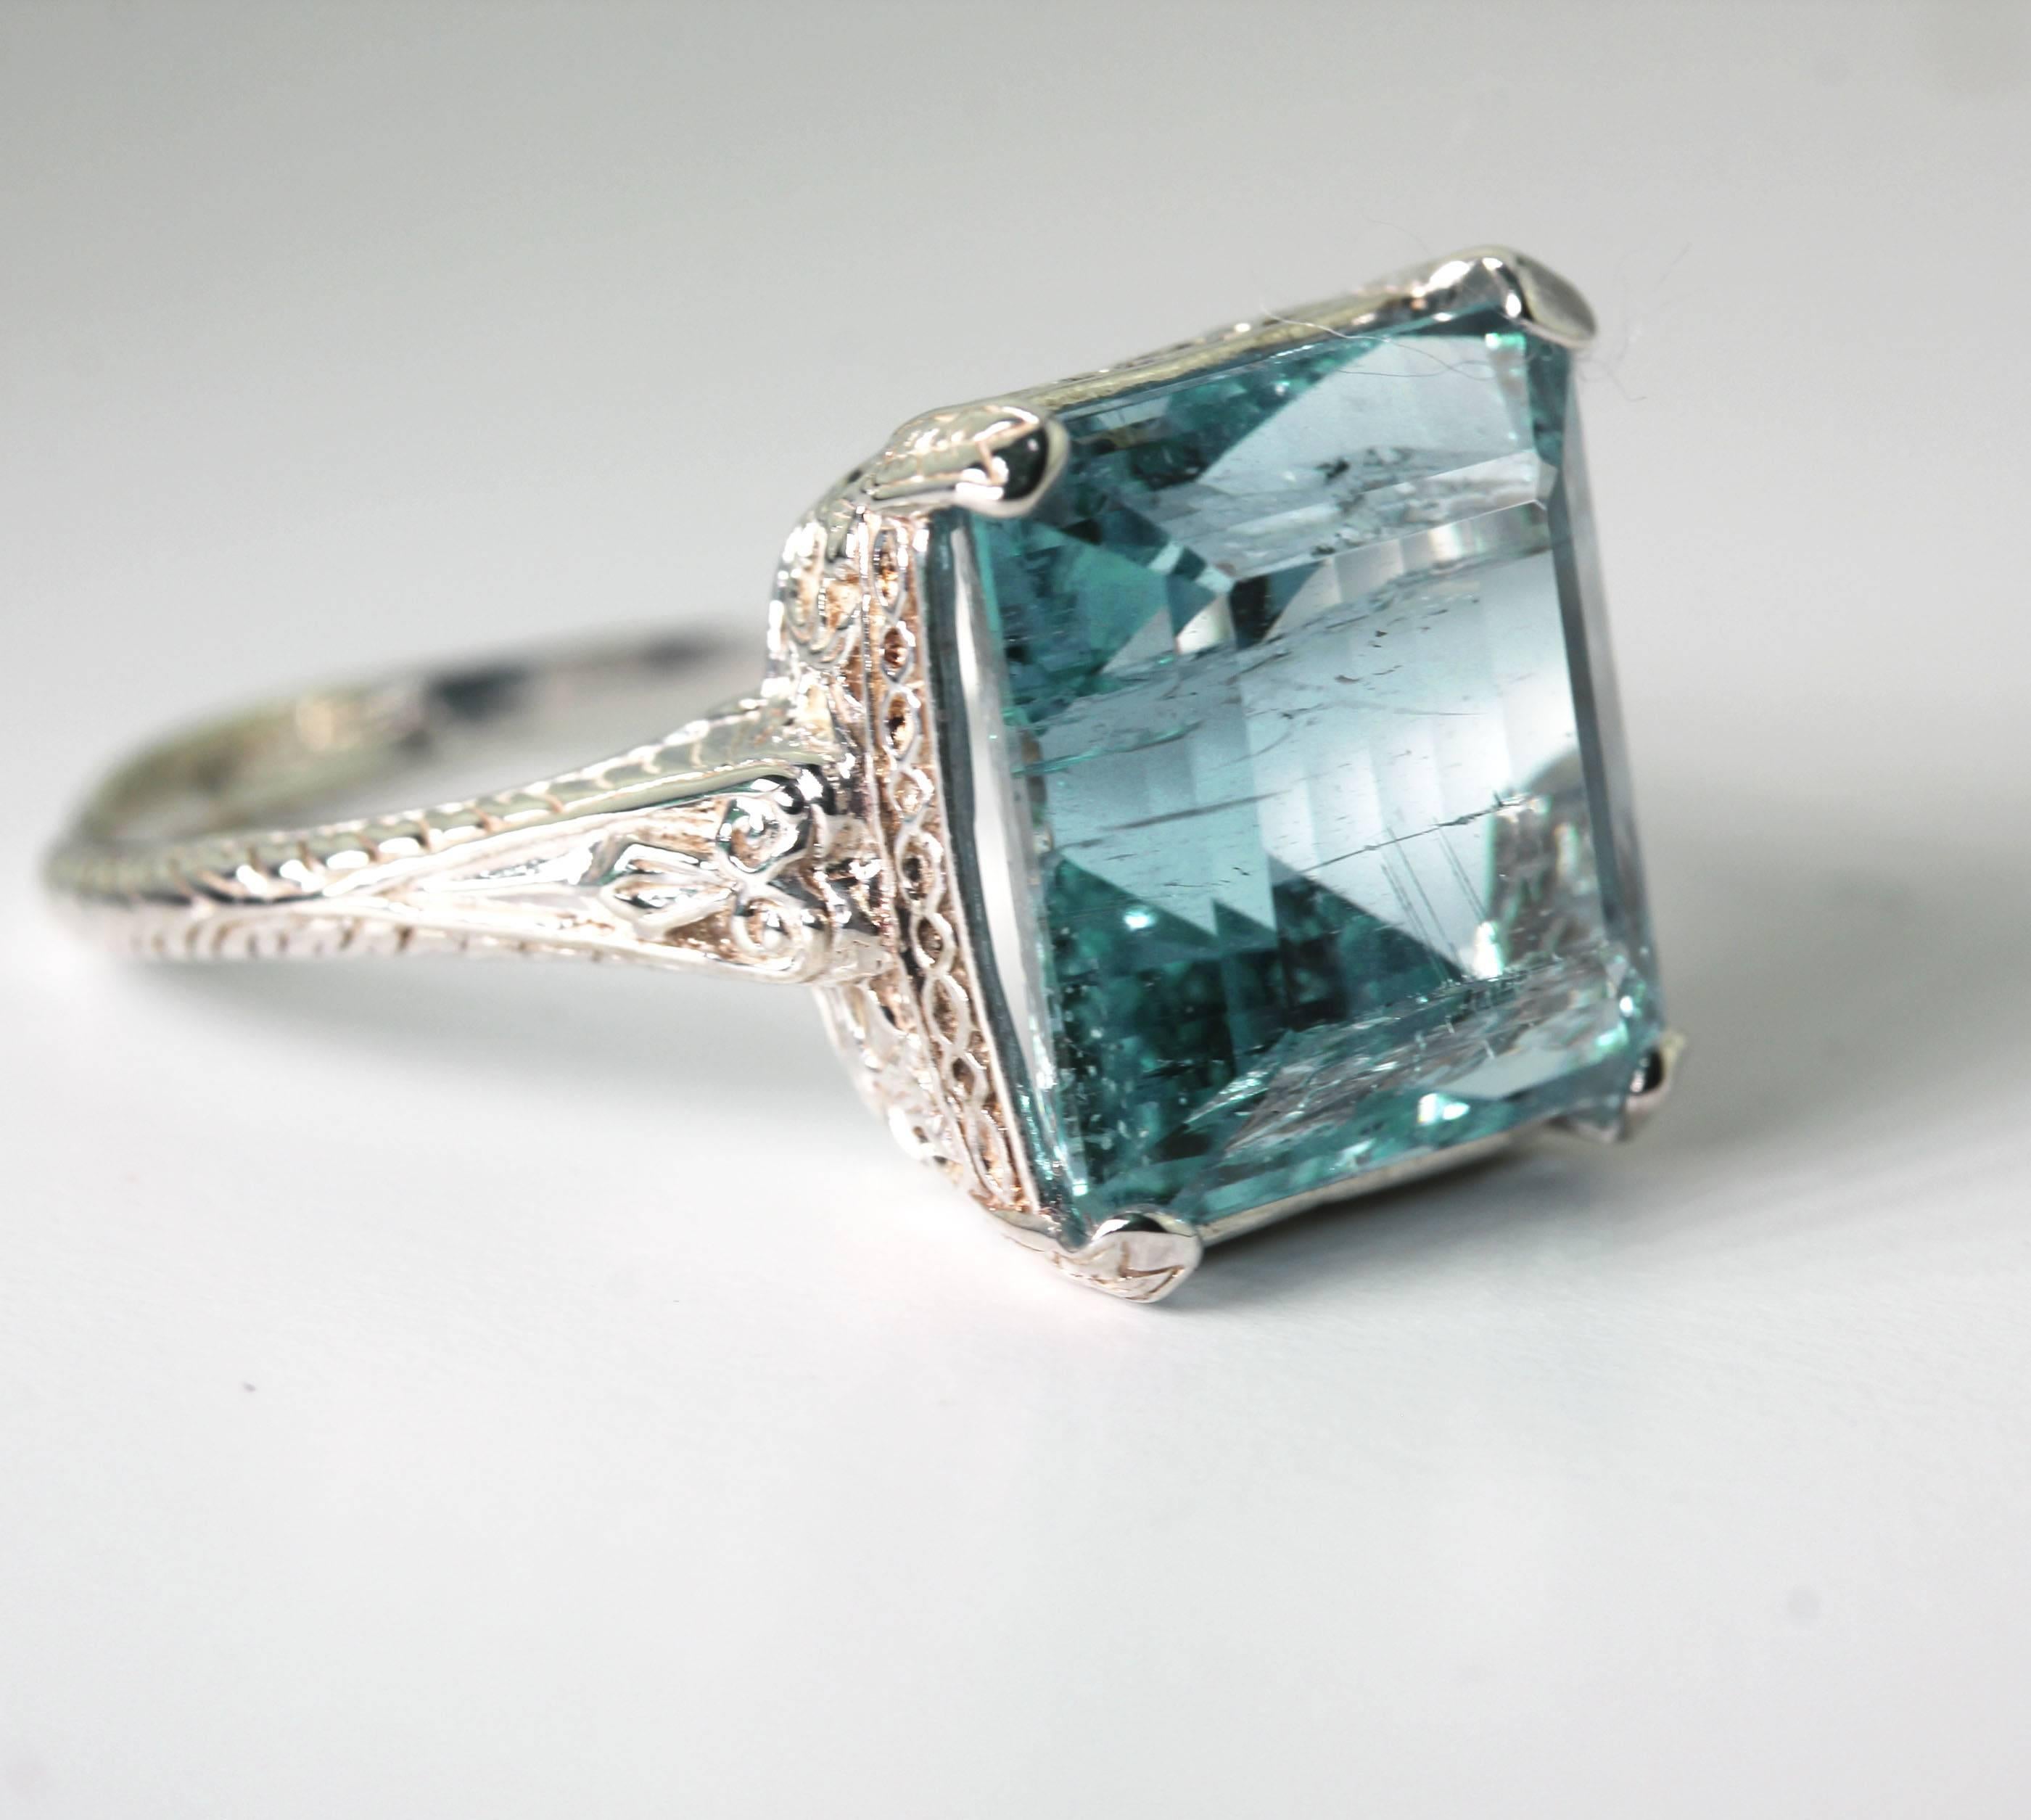 Beautiful glittering intense blue Santa Maria Brazilian 8 carat Aquamarine set in a sterling silver ring size 9 (sizable).  Note the inclusions increase the sparkle of the gemstone which measures 13 mm x 12.2 mm).